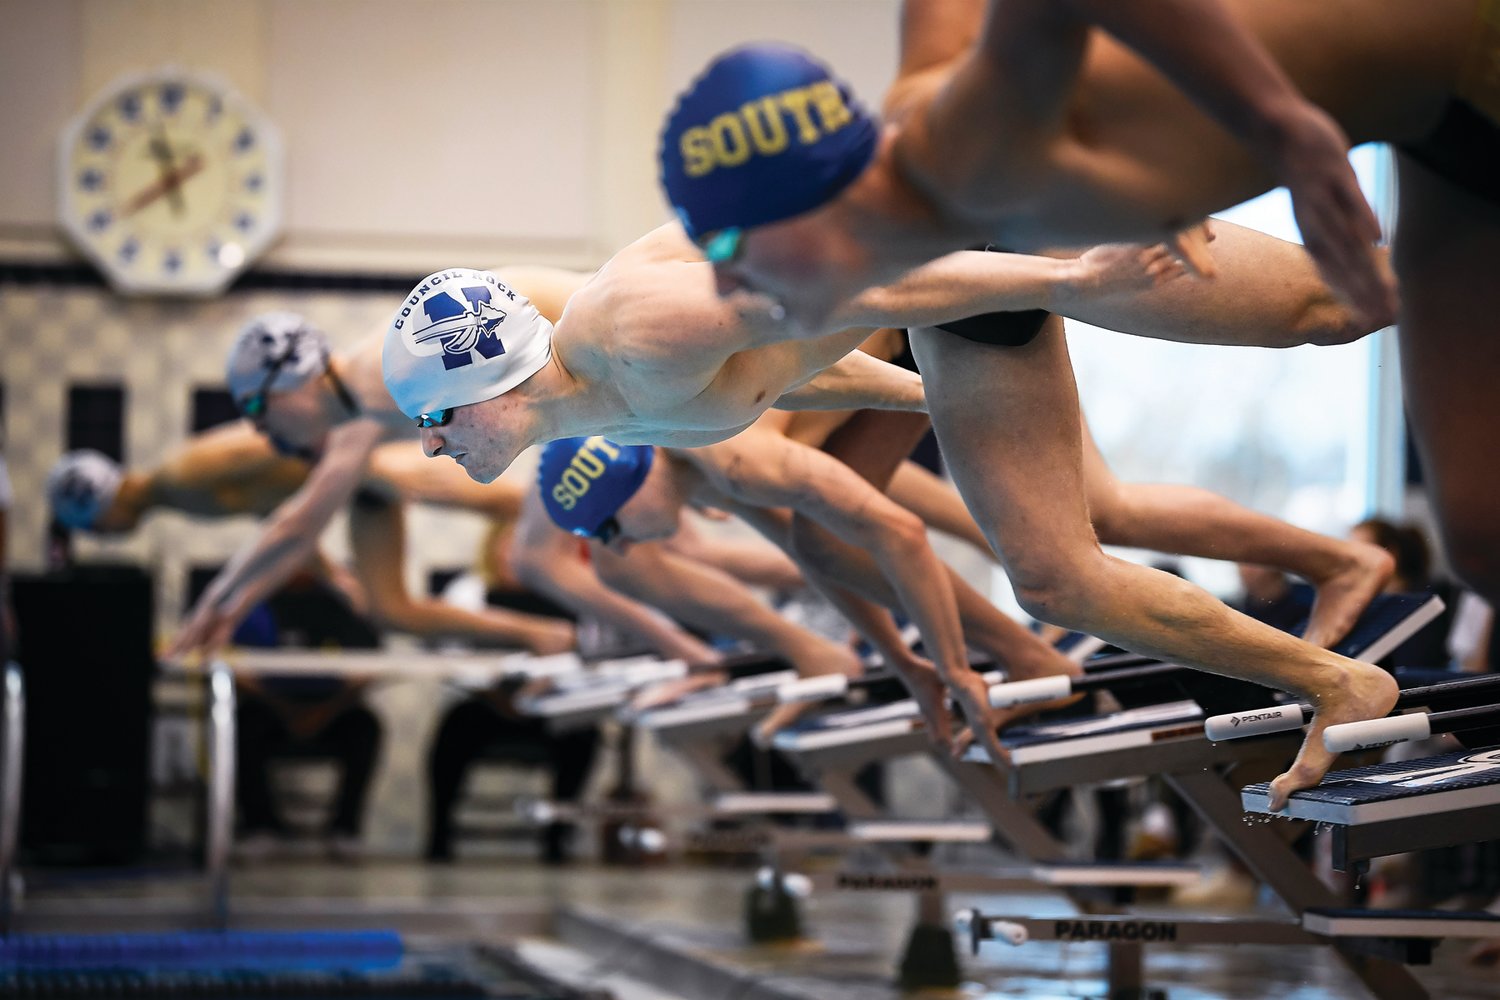 Michael A. Apice
Swimmers take off during the 200-meter freestyle.